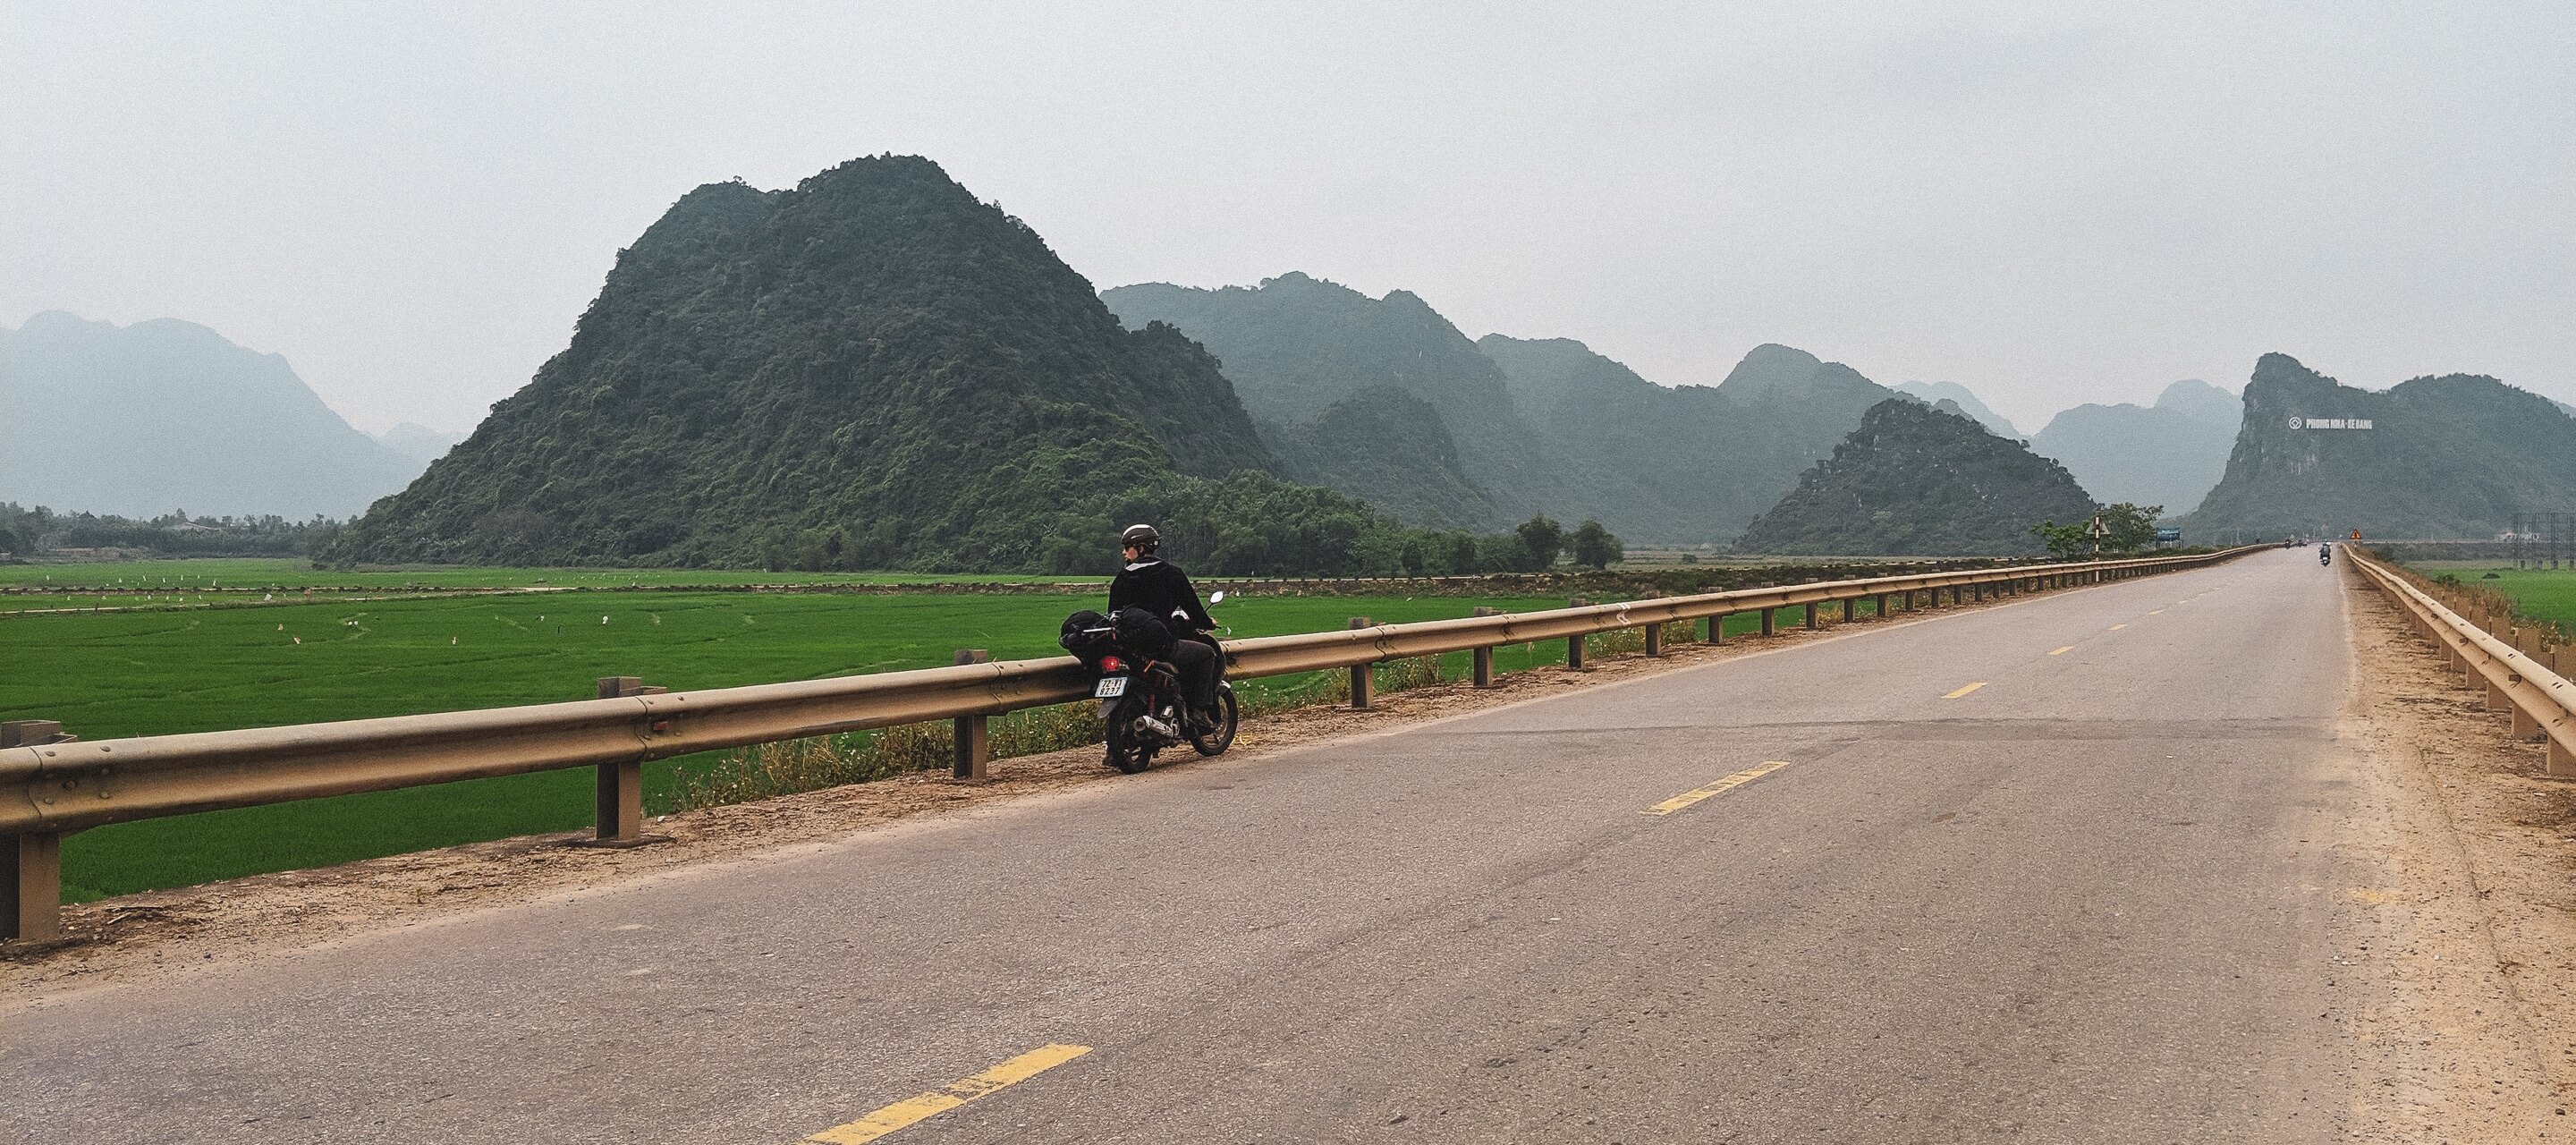 A guide to Vietnam by motorbike